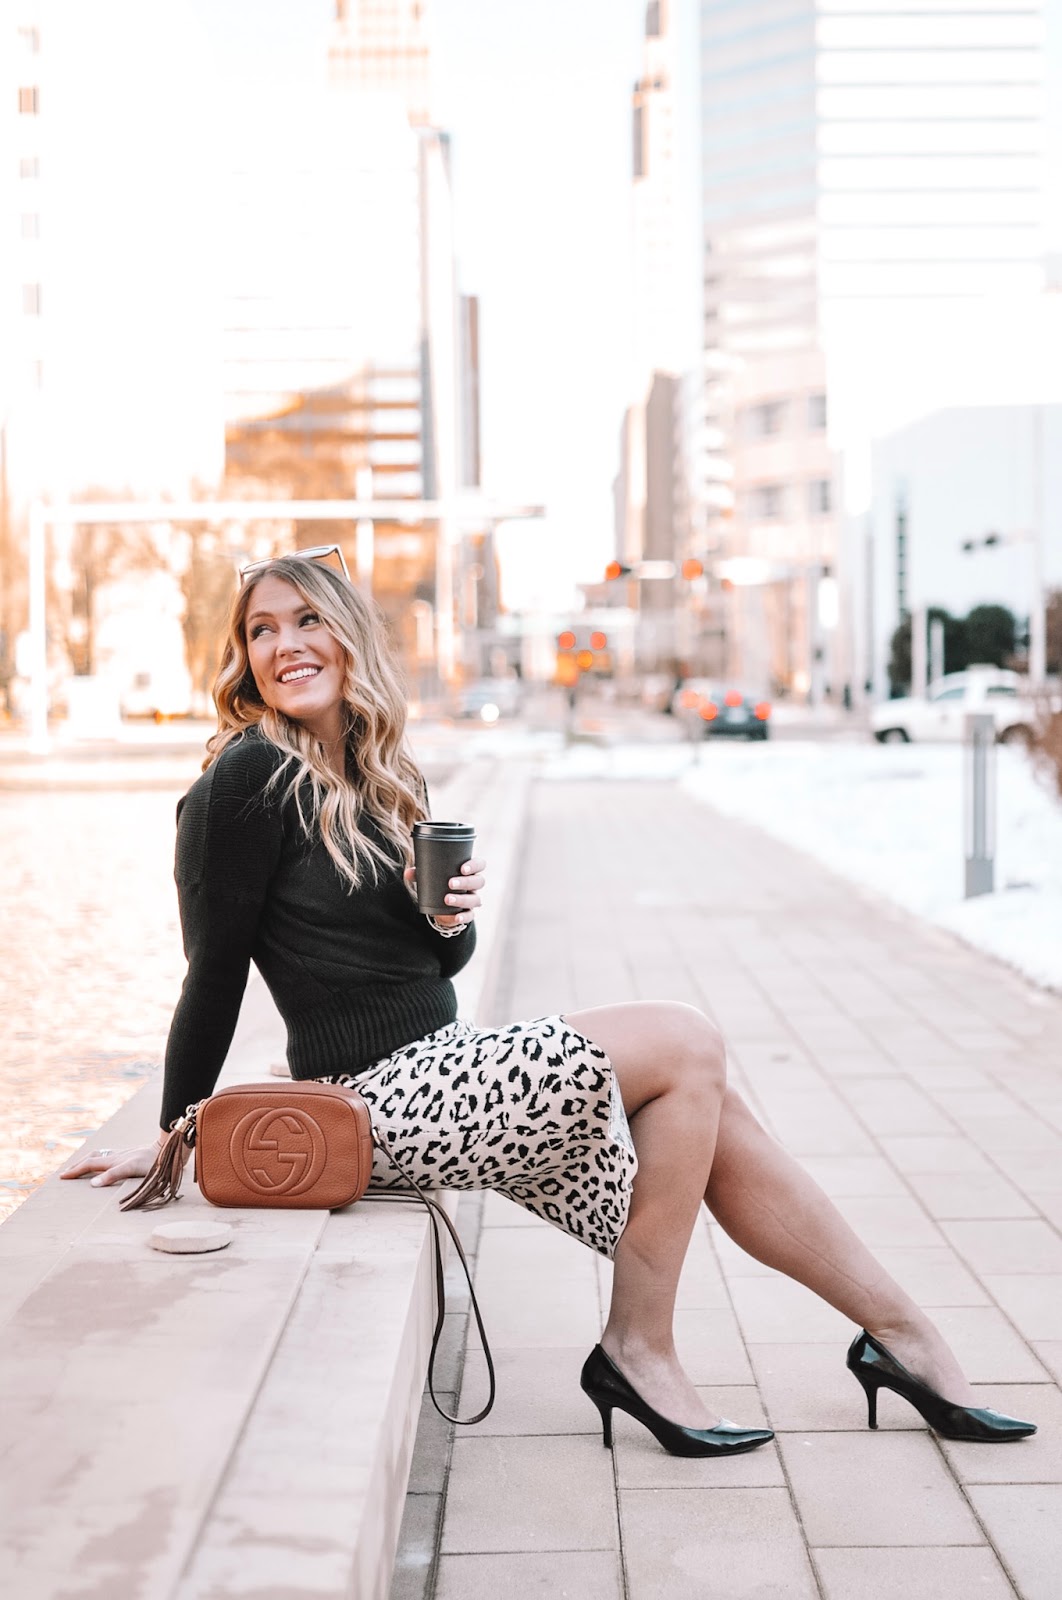 Amanda Martin, OKC Blogger, turns 29 in style with a leopard skirt and chic sweater top. 